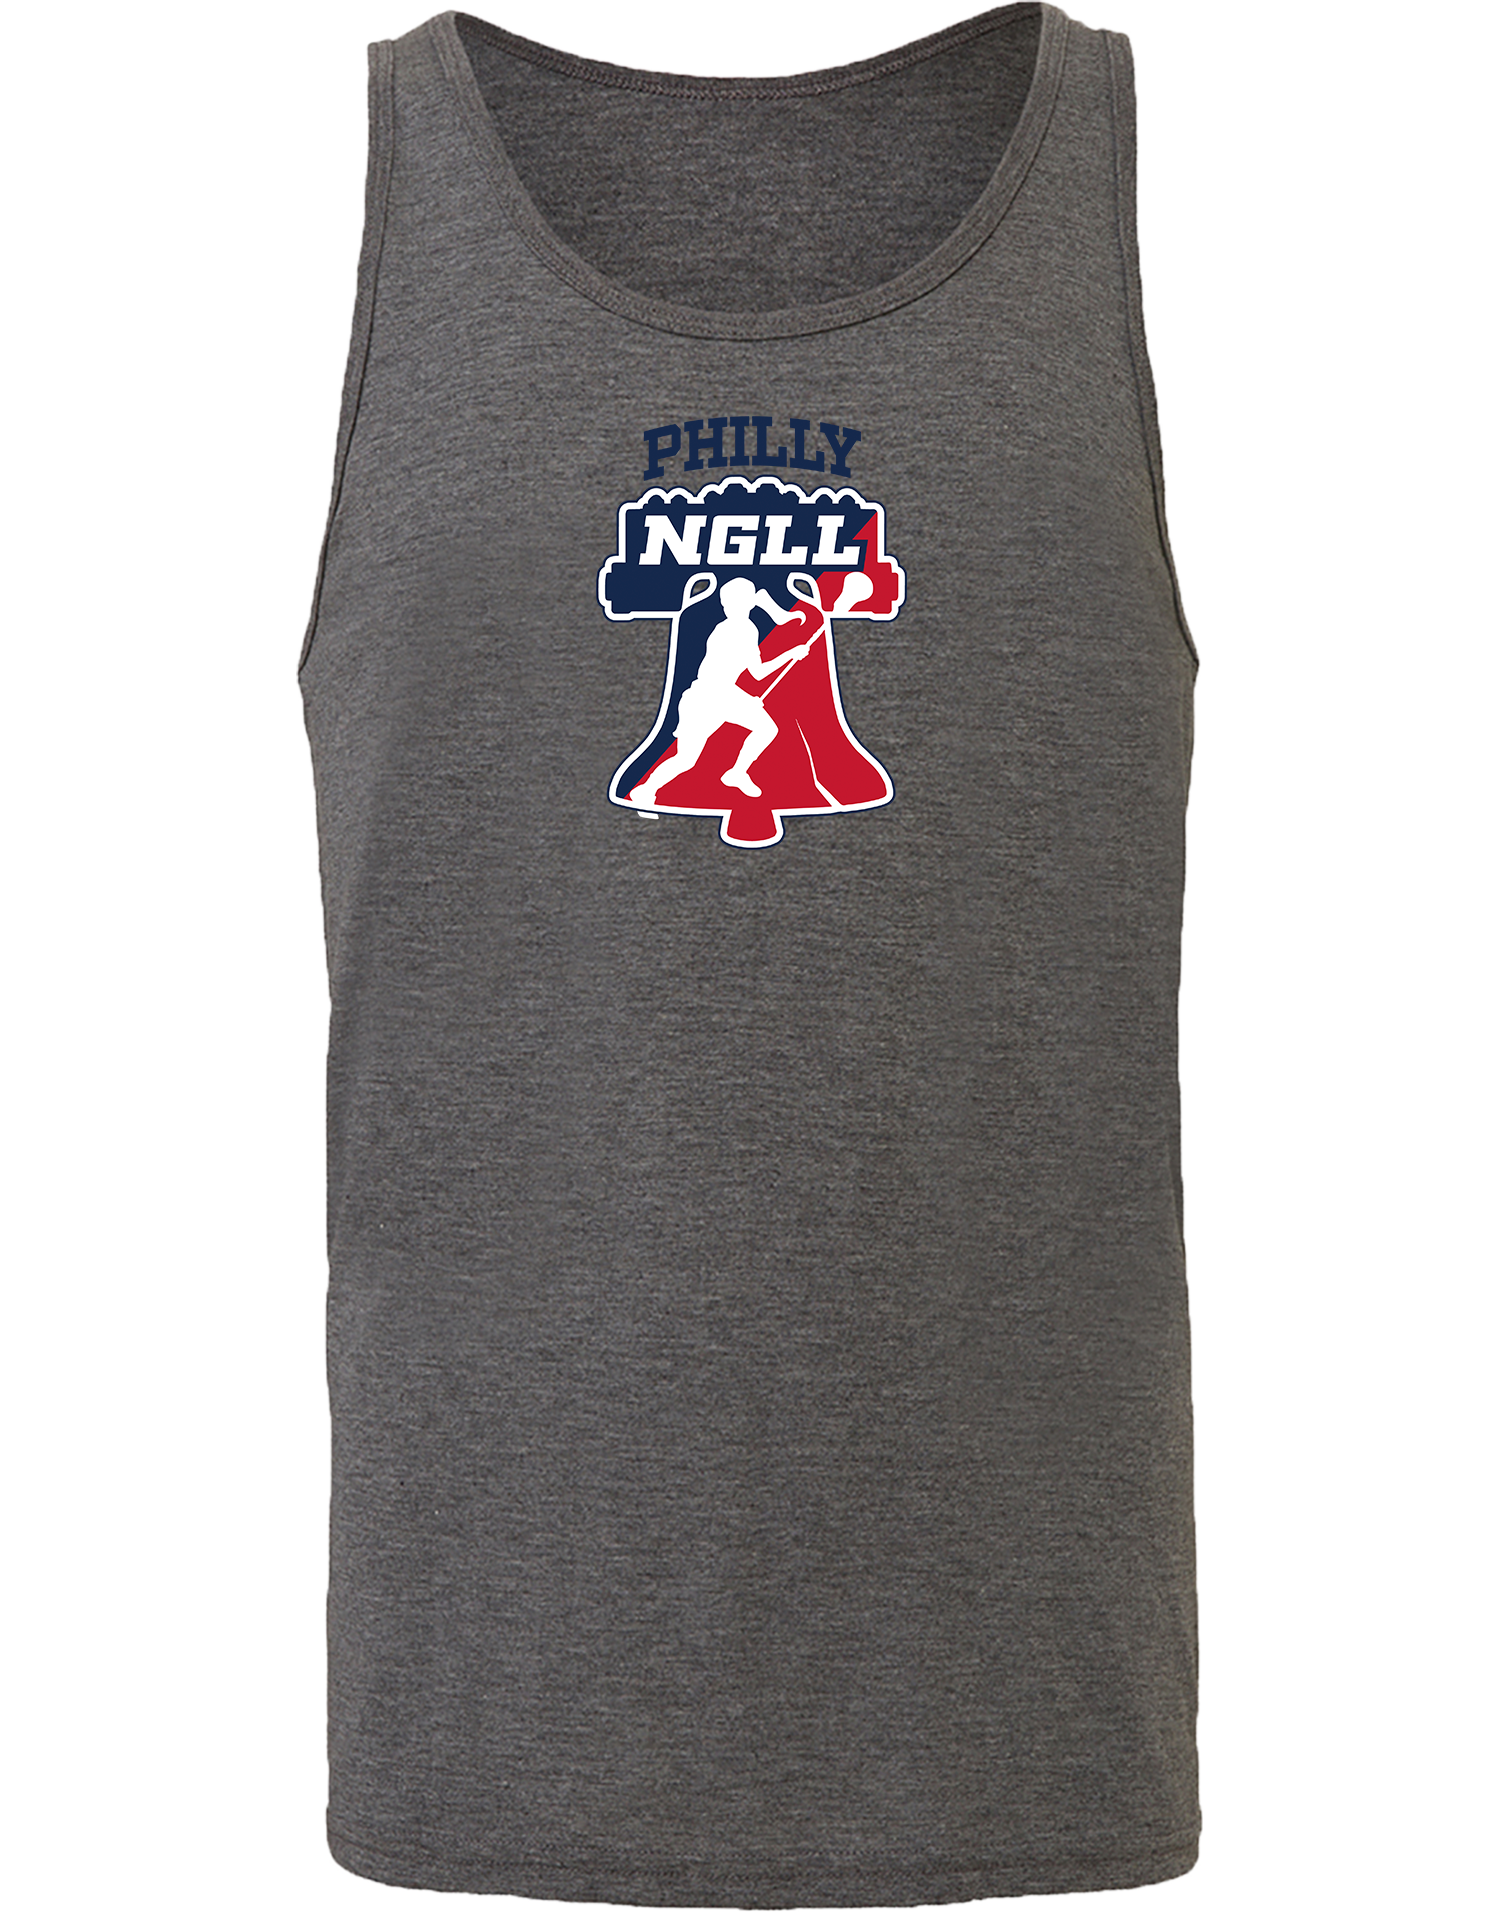 TANK TOP - 2023 NGLL Philly